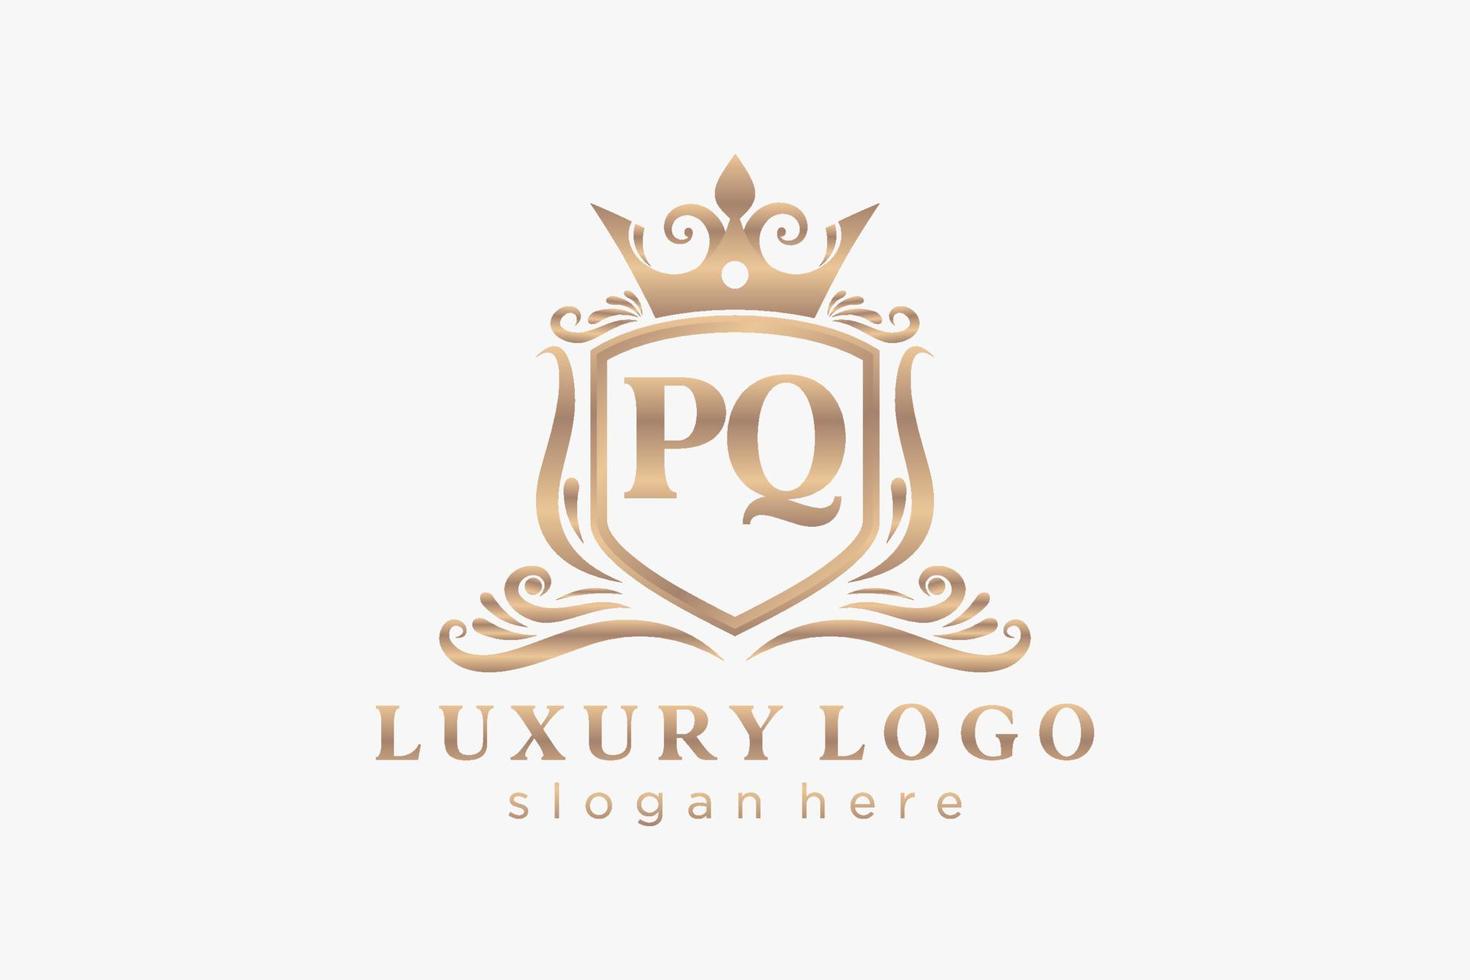 Initial PQ Letter Royal Luxury Logo template in vector art for Restaurant, Royalty, Boutique, Cafe, Hotel, Heraldic, Jewelry, Fashion and other vector illustration.